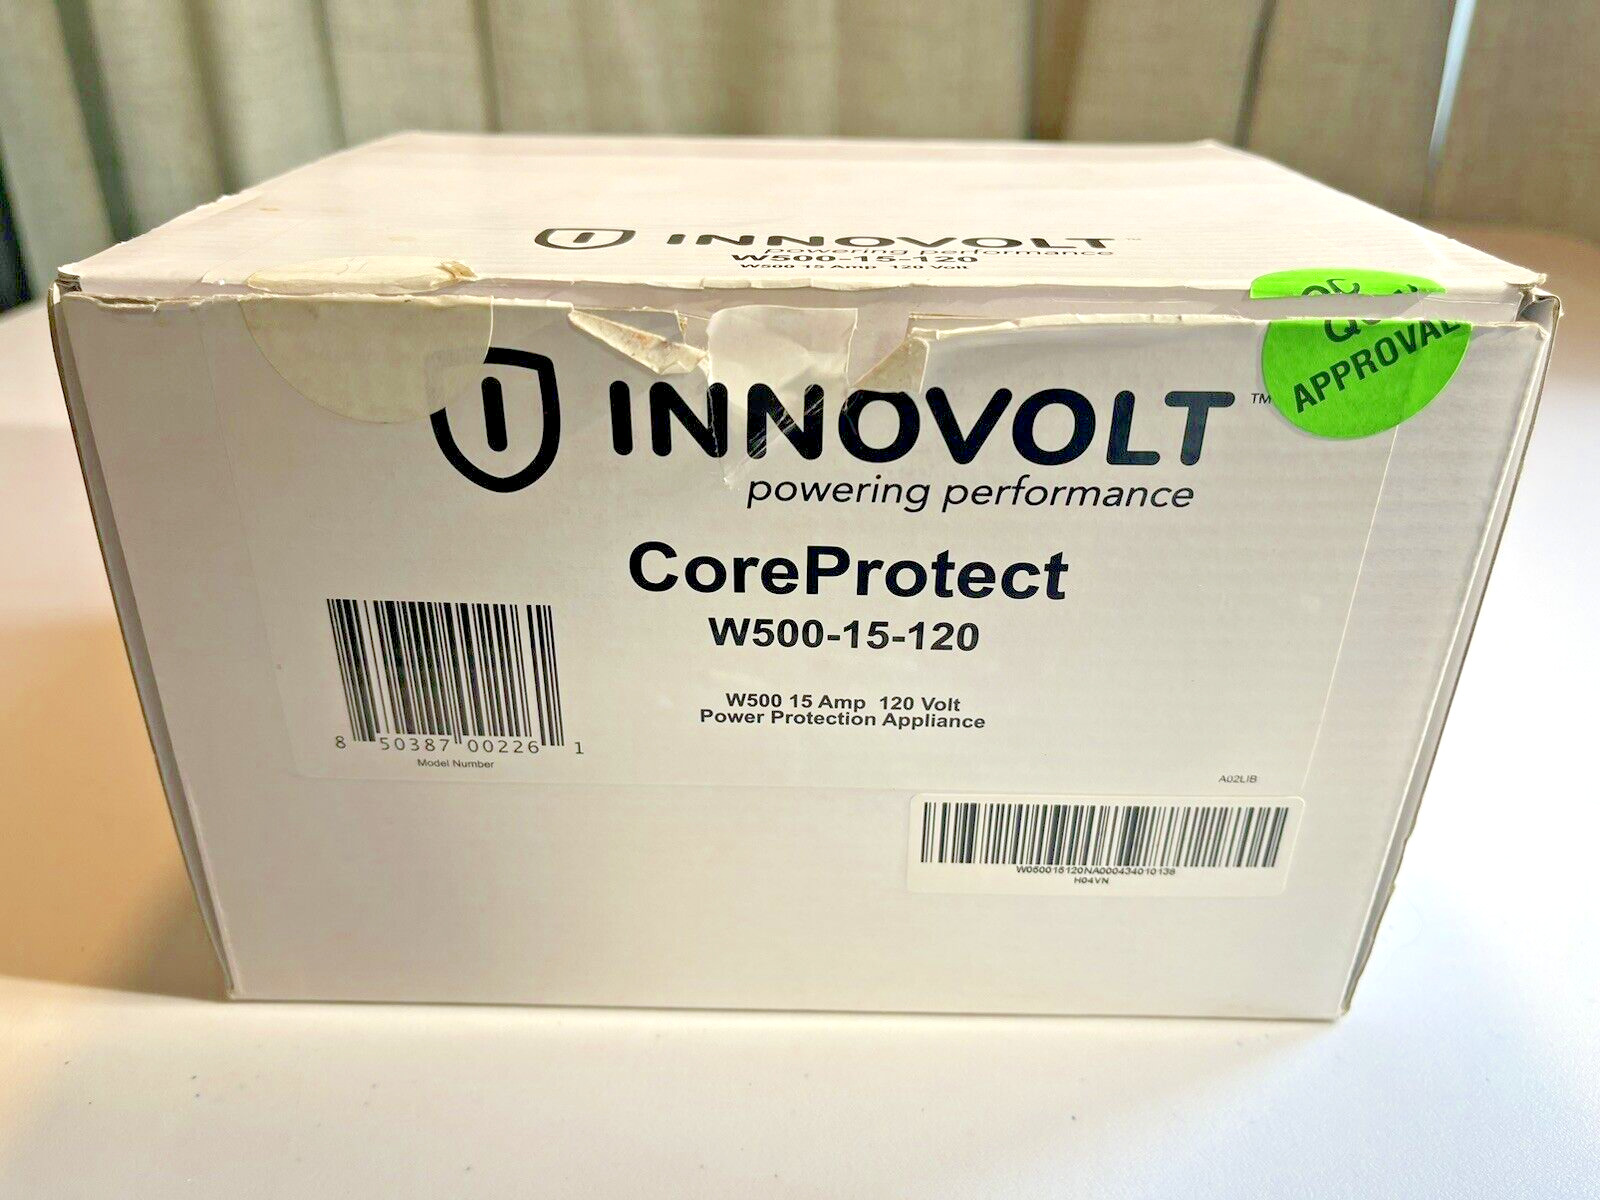 New Innovolt CoreProtect W500-15-120 15 Amp 120 Volt Power Protection Appliance